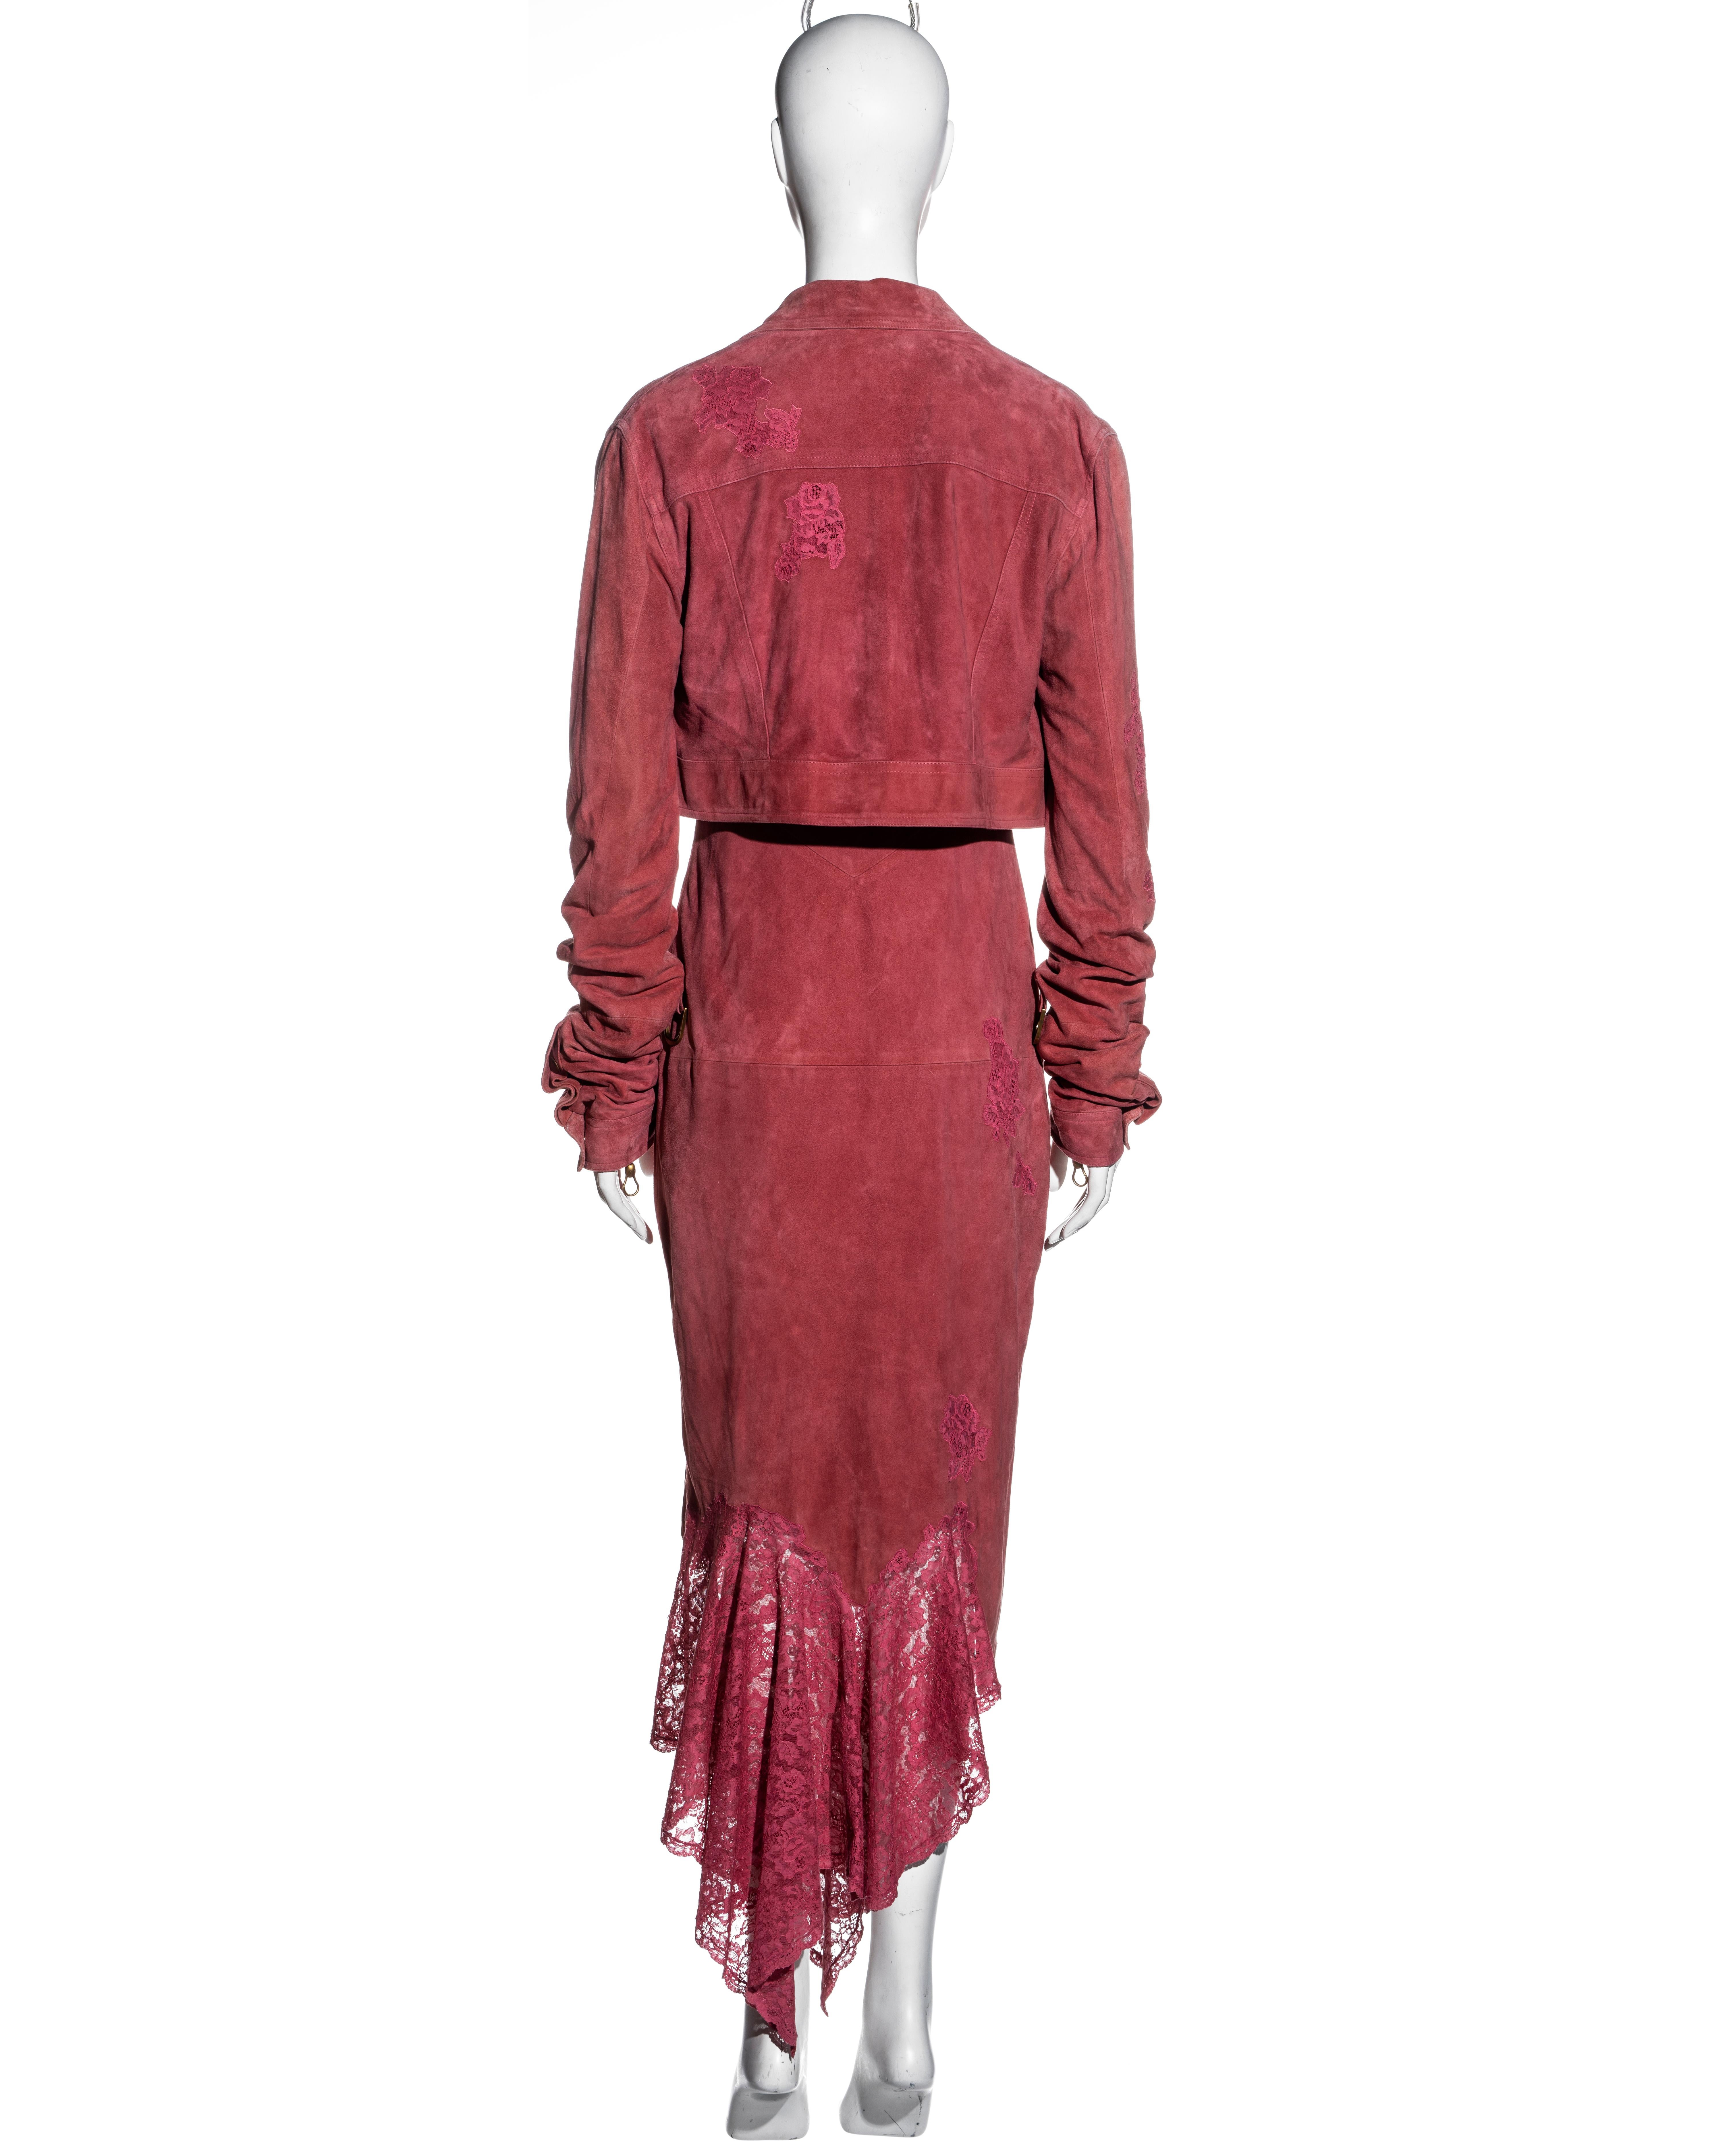 Christian Dior by John Galliano pink suede and lace dress and jacket, fw 2000 For Sale 6